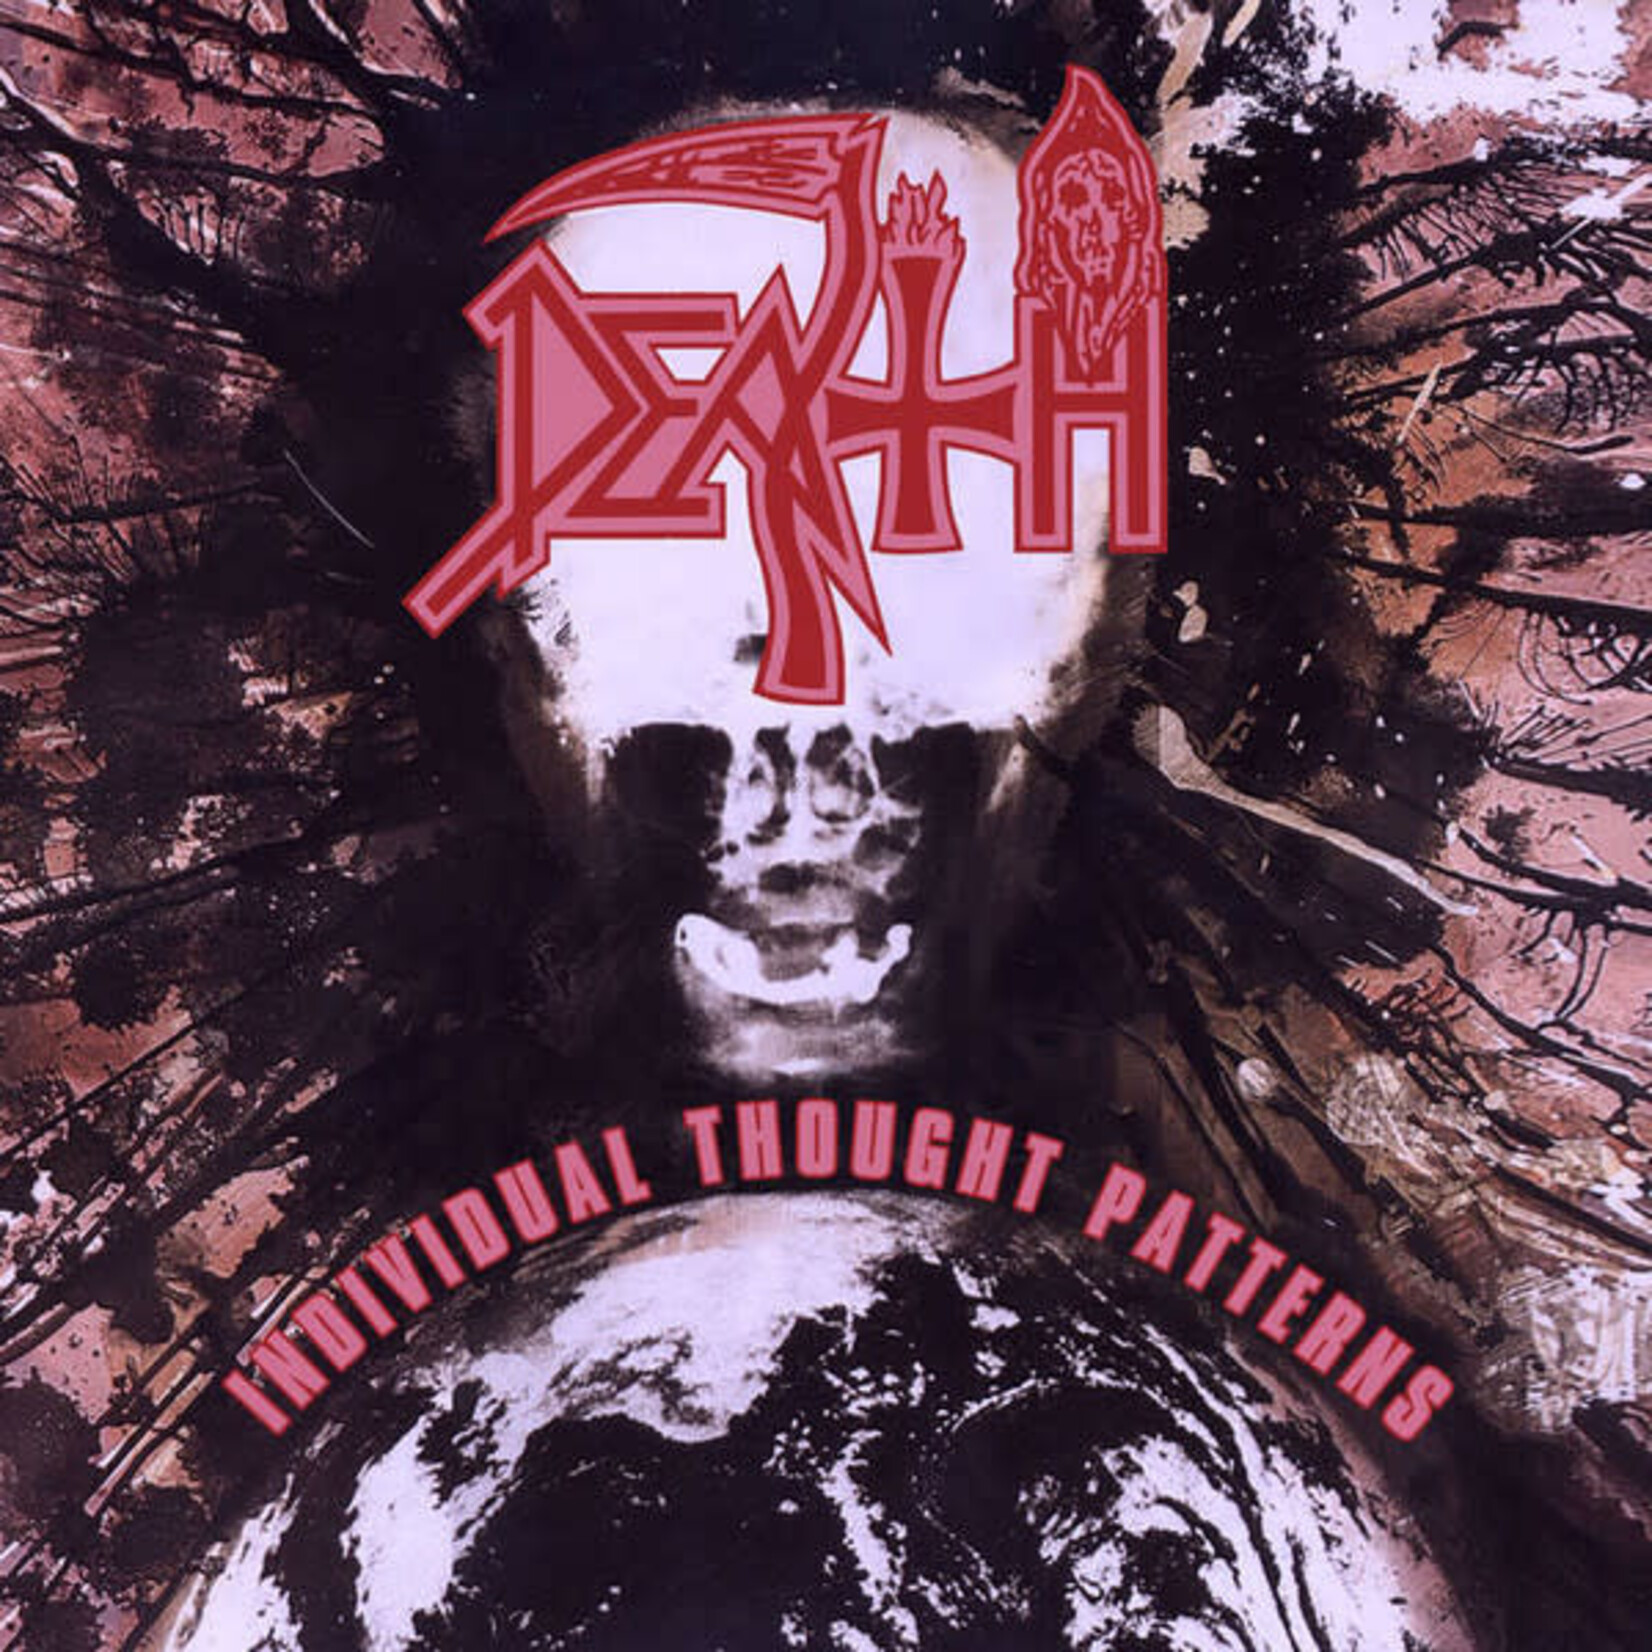 Relapse Death - Individual Thought Patterns (LP)